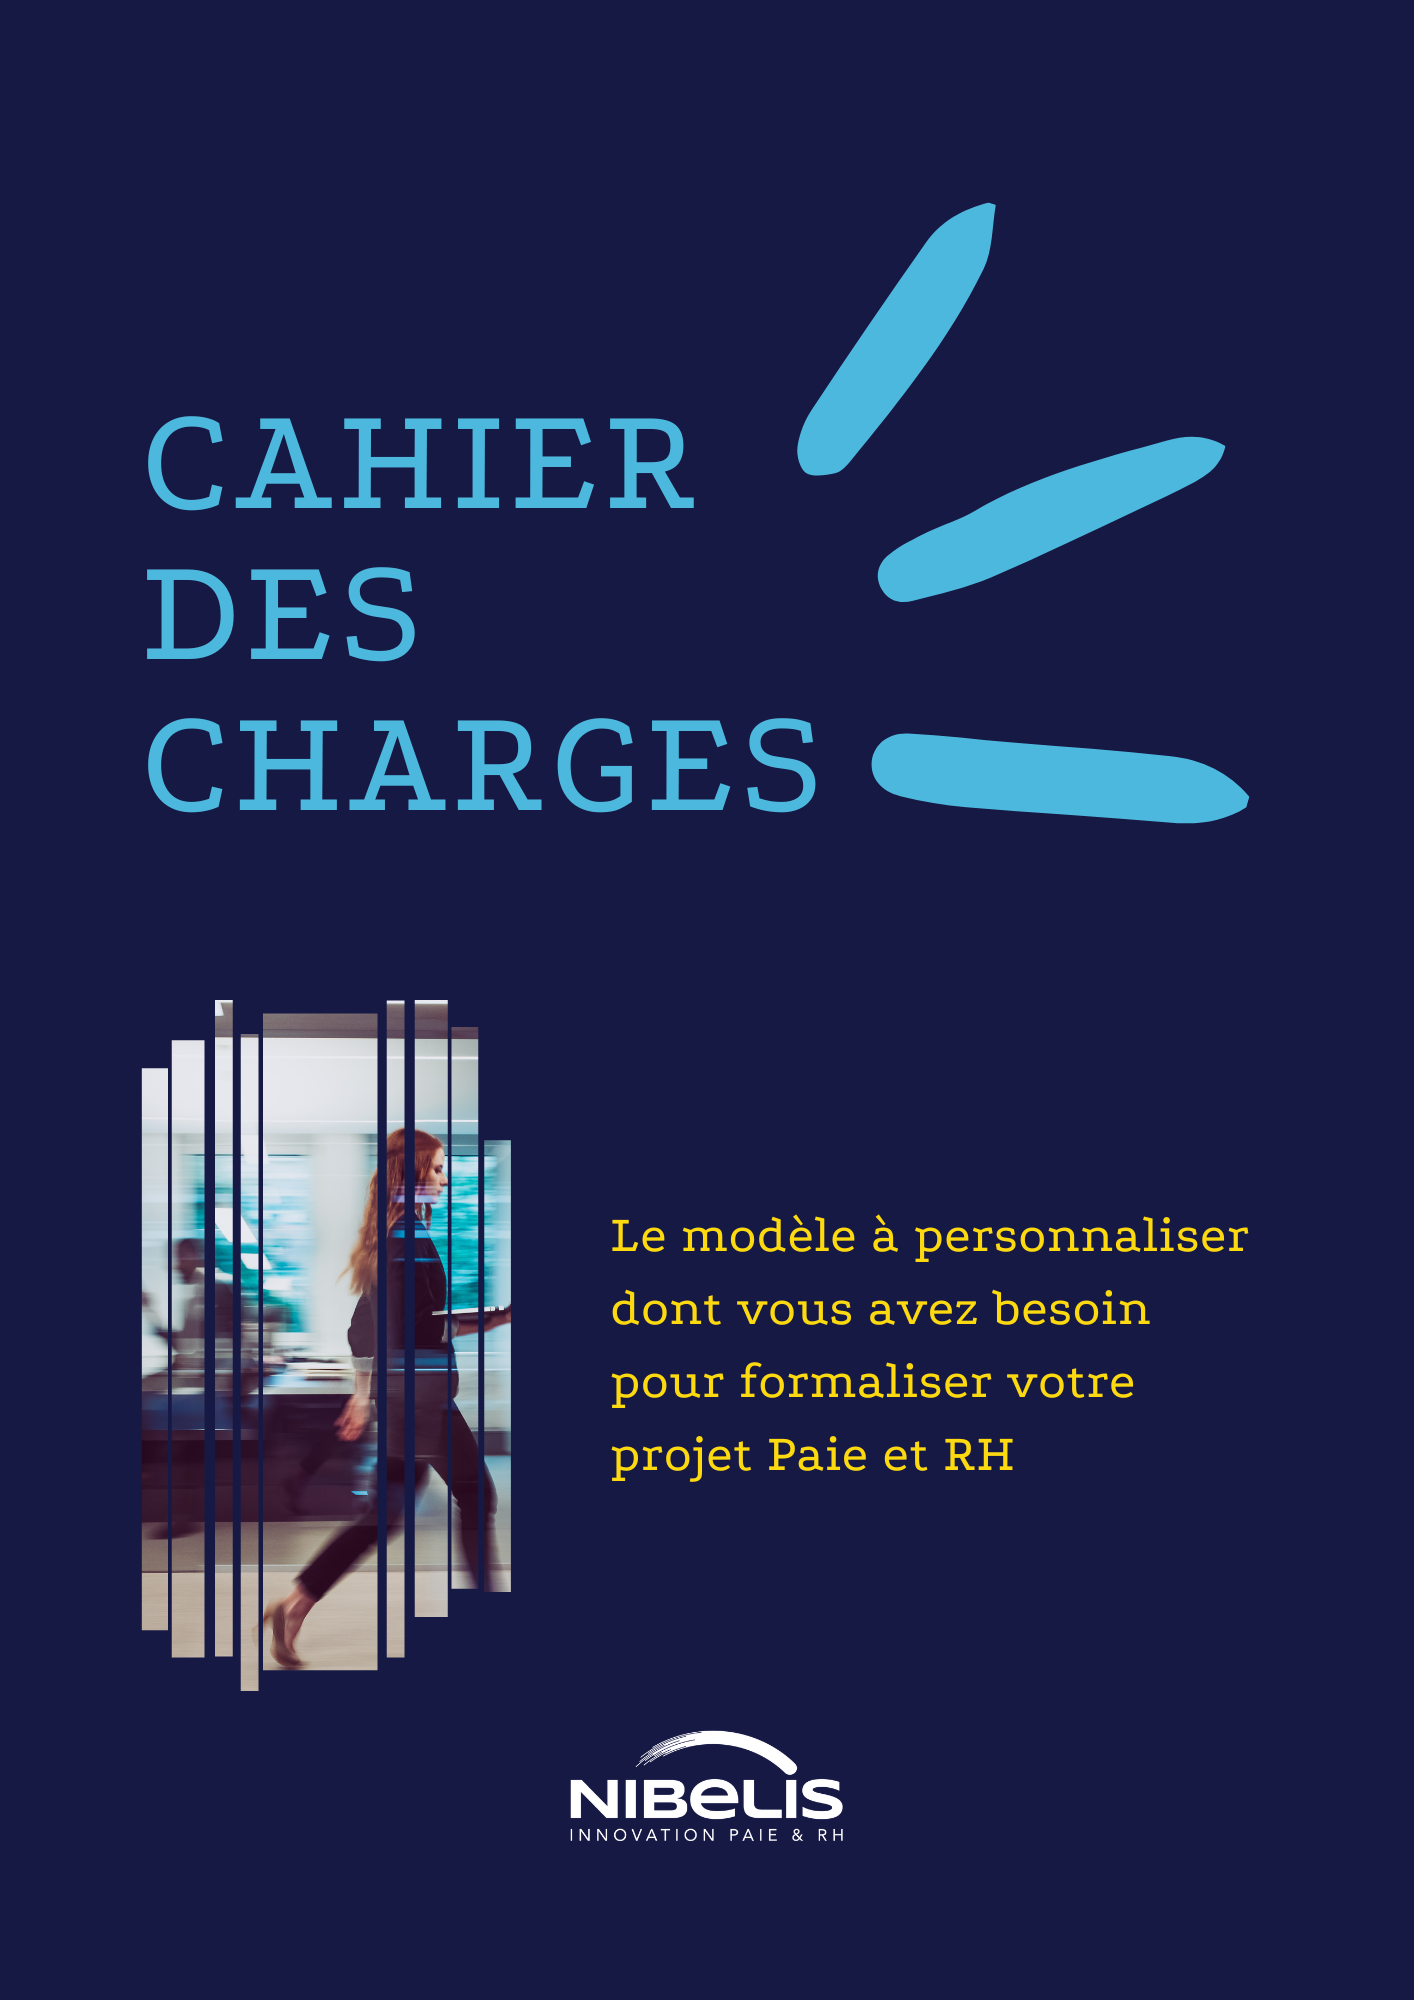 cahier-des-charges-sirh-cahier-des-charges